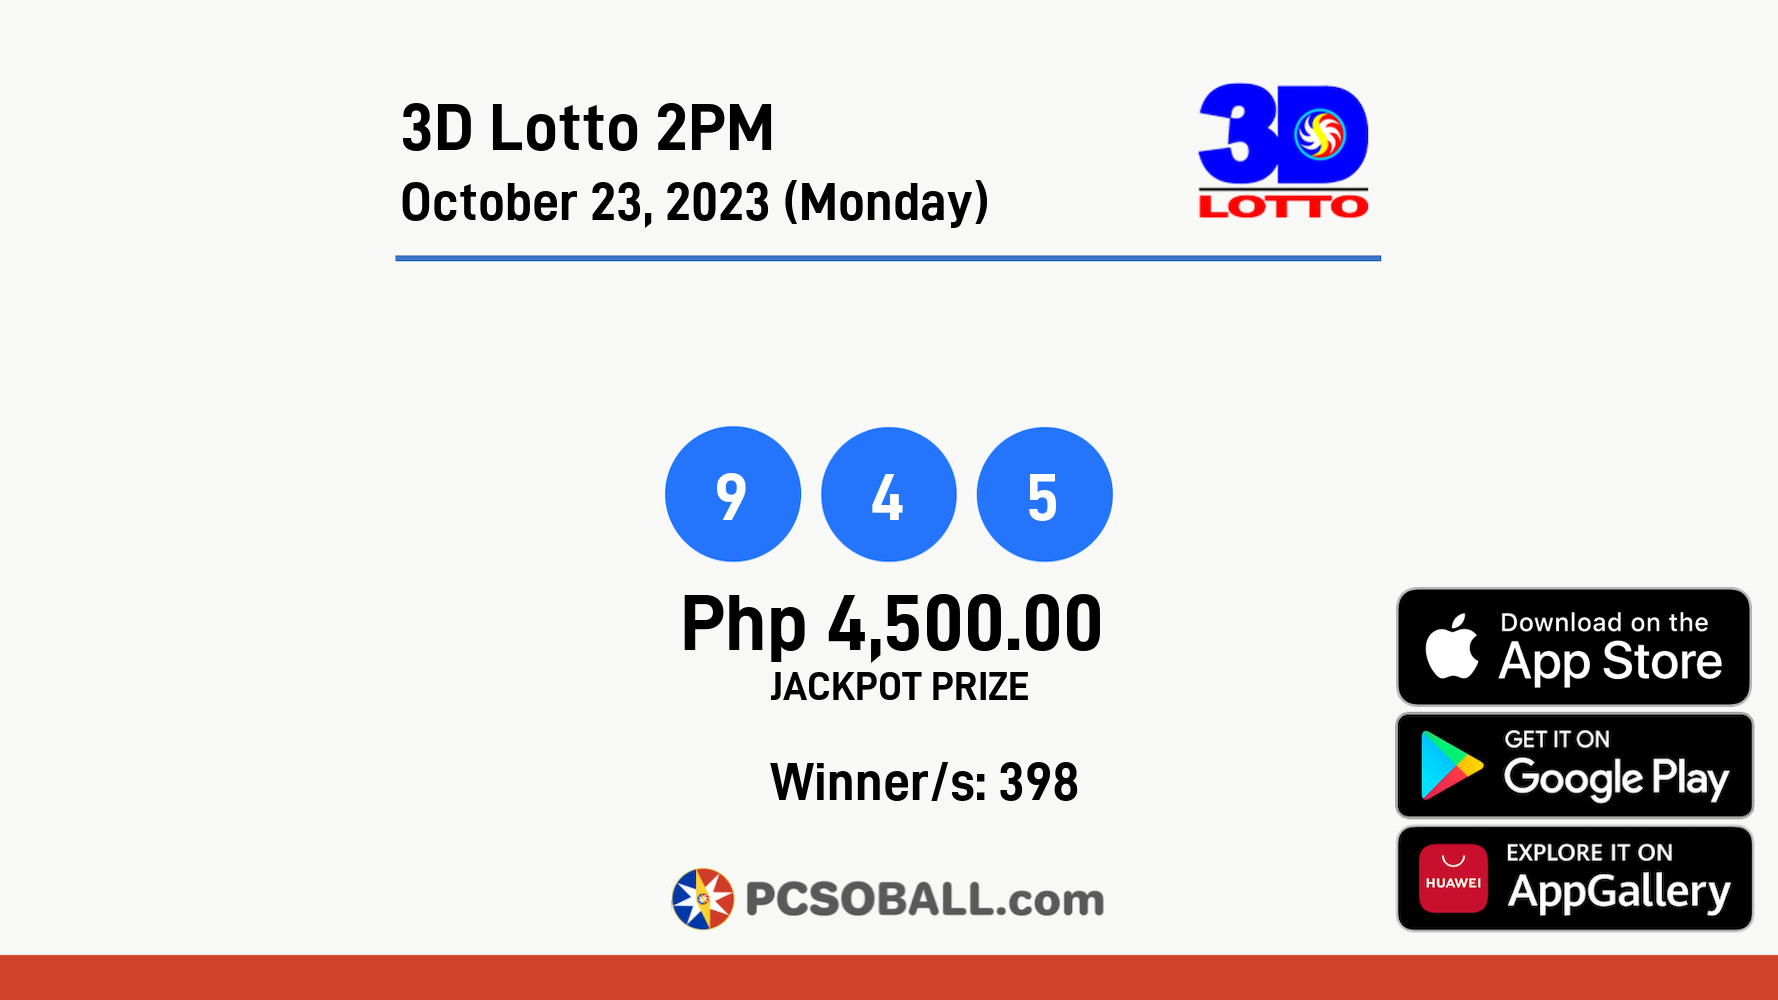 3D Lotto 2PM October 23, 2023 (Monday) Result